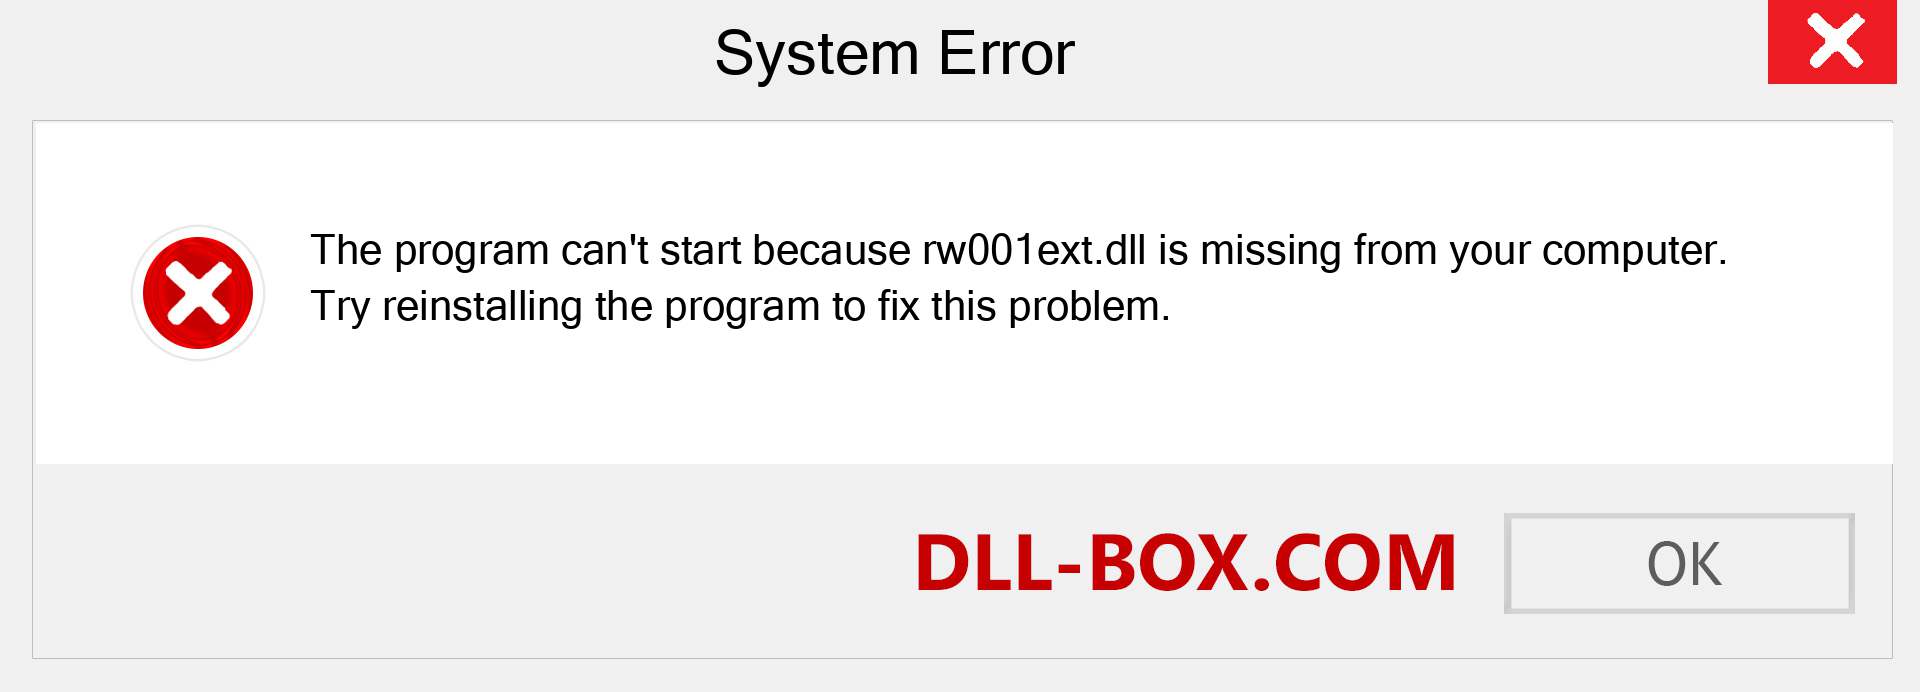  rw001ext.dll file is missing?. Download for Windows 7, 8, 10 - Fix  rw001ext dll Missing Error on Windows, photos, images